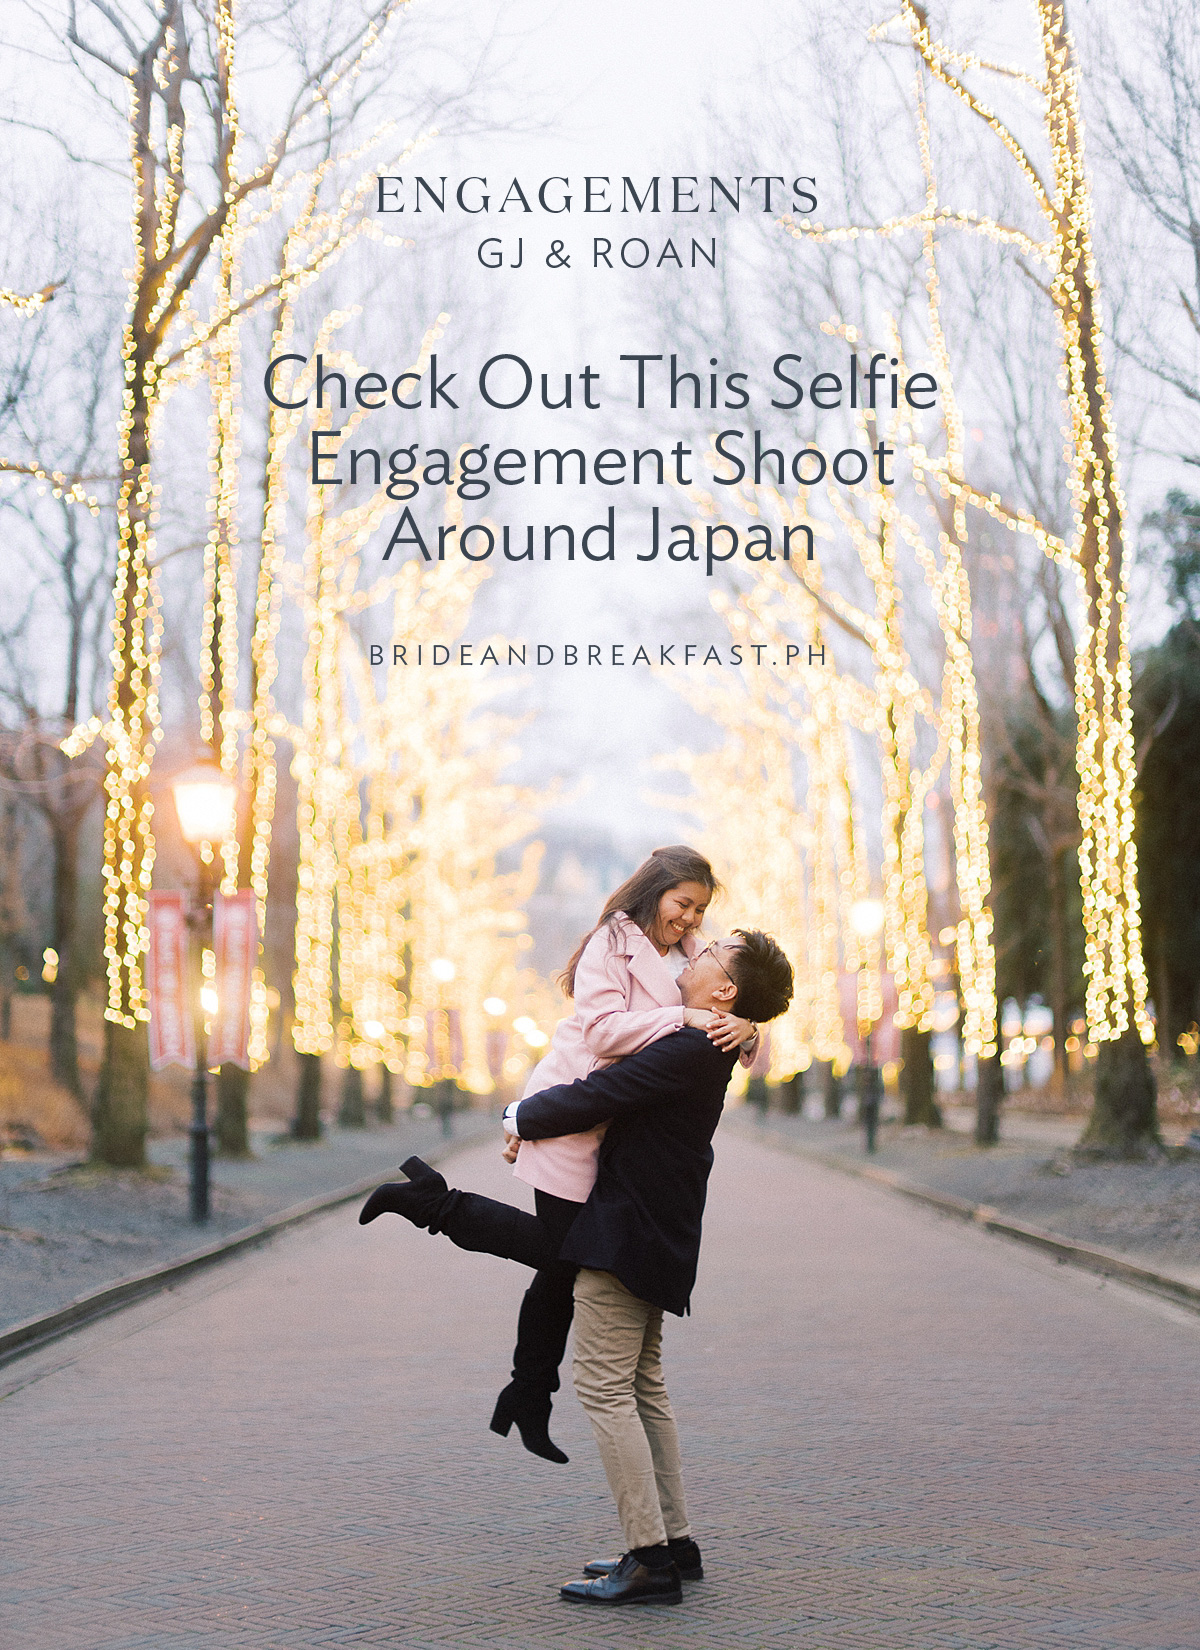 Check Out This Selfie Engagement Shoot Around Japan